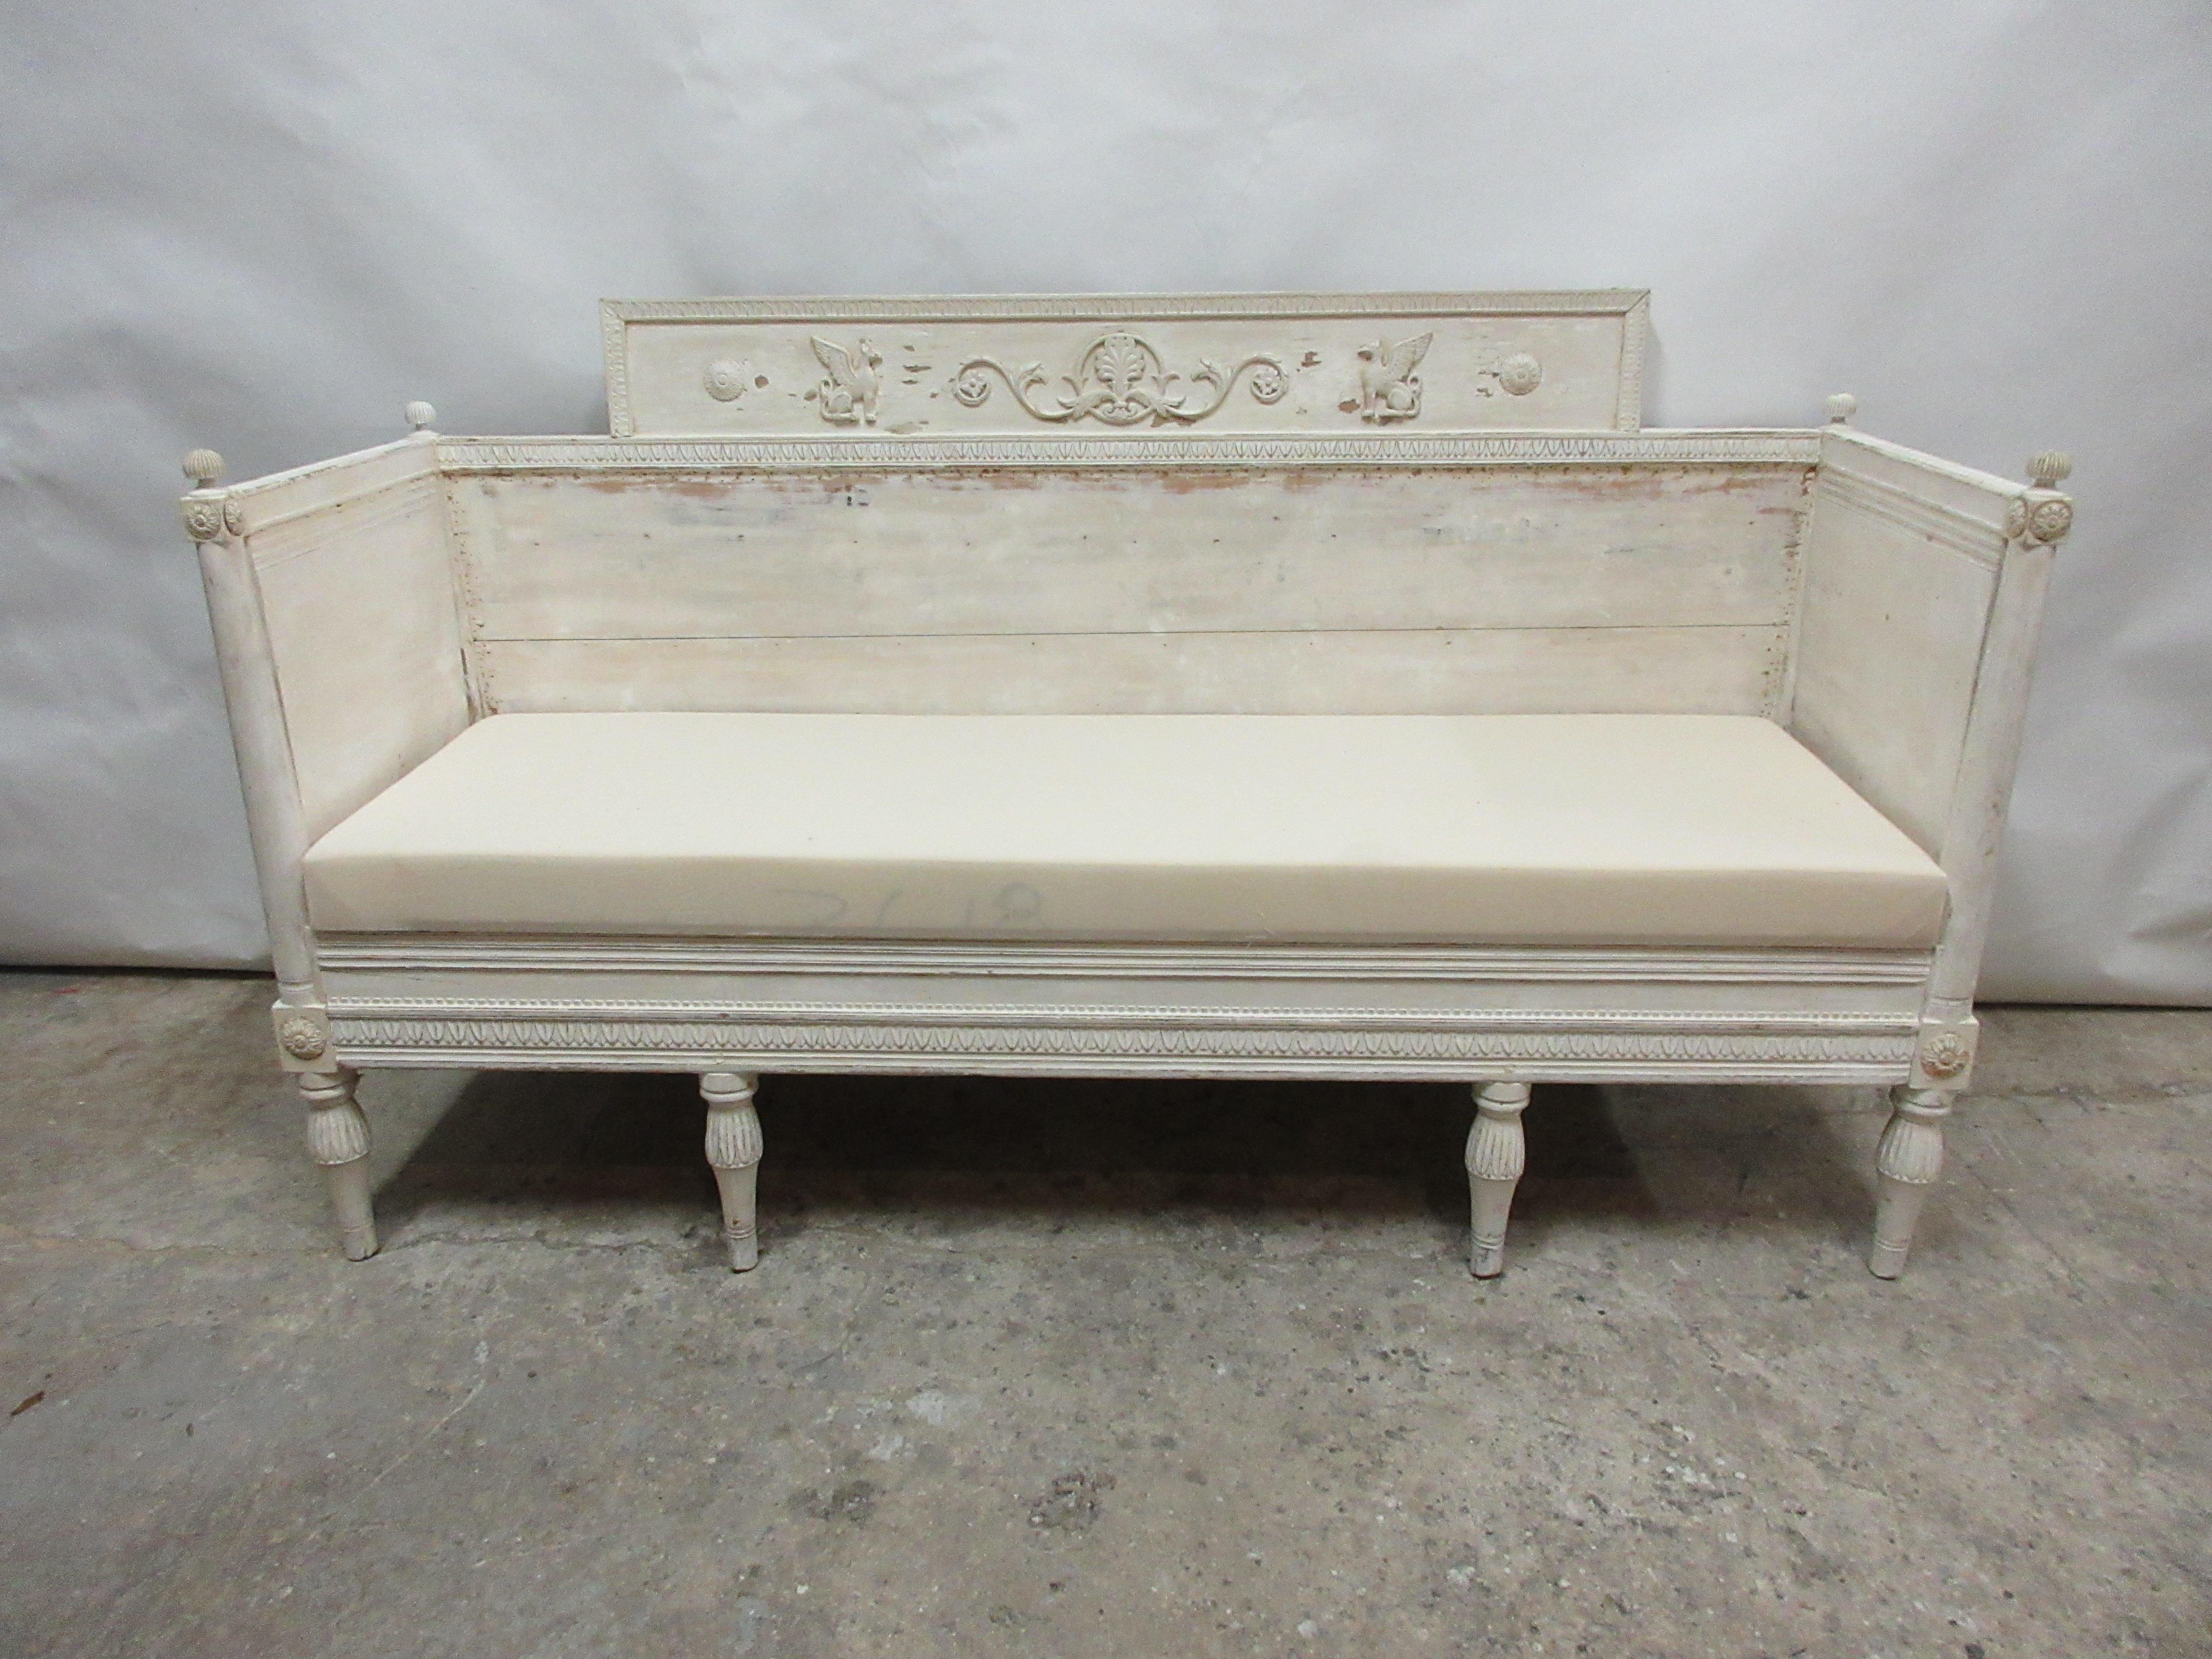 This is a 100% original finish Swedish Gustavian sofa. Seating has been restored and covered in muslin.